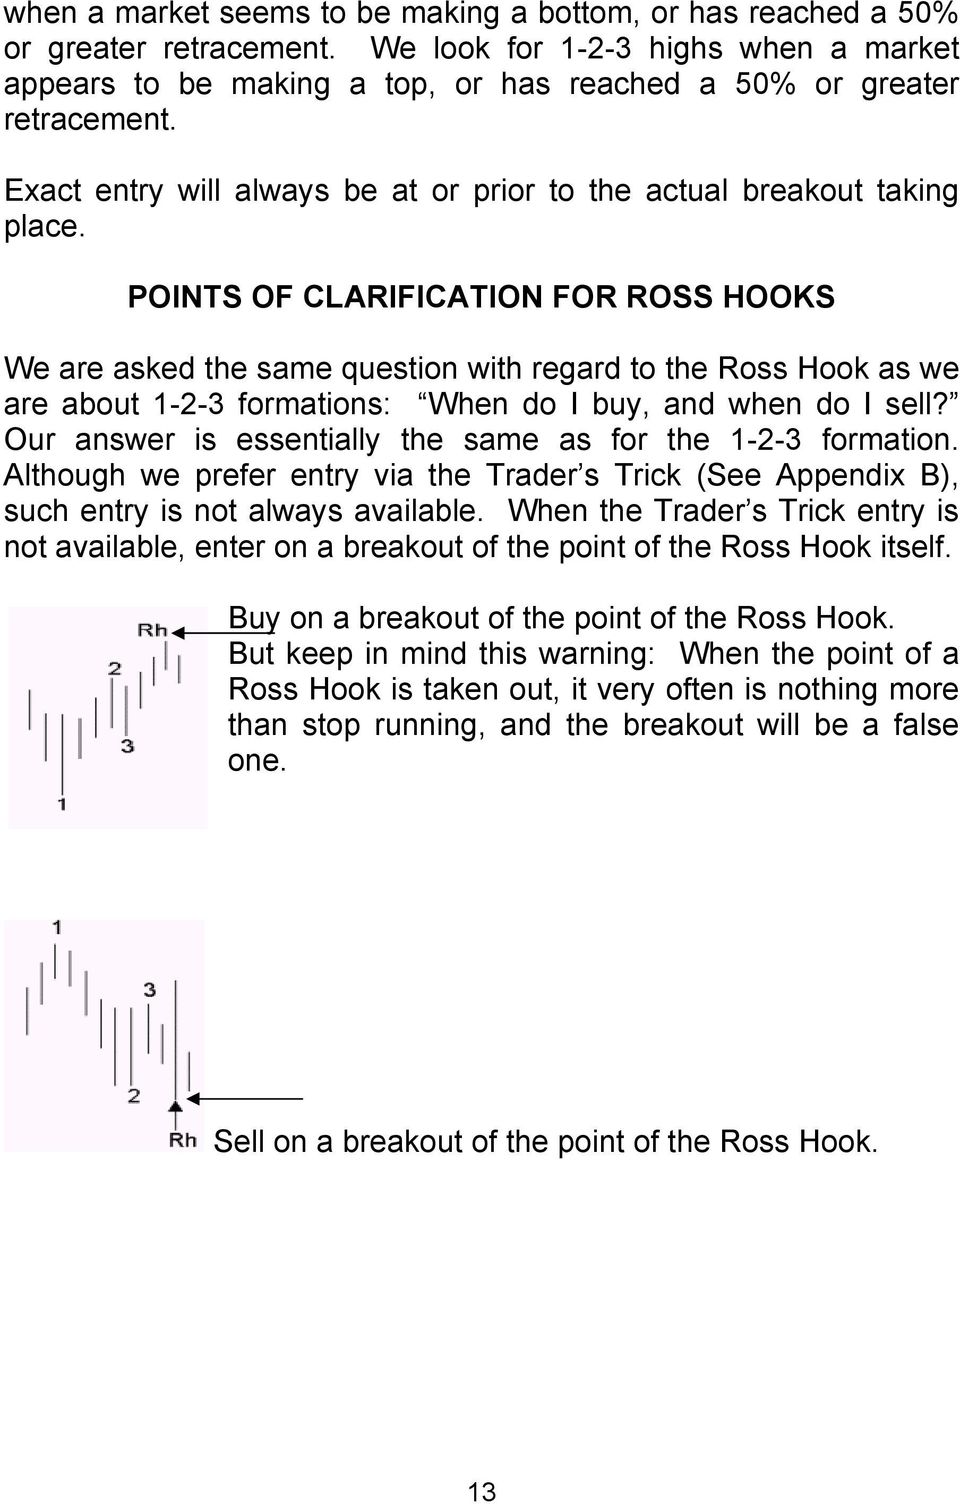 POINTS OF CLARIFICATION FOR ROSS HOOKS We are asked the same question with regard to the Ross Hook as we are about 1-2-3 formations: When do I buy, and when do I sell?